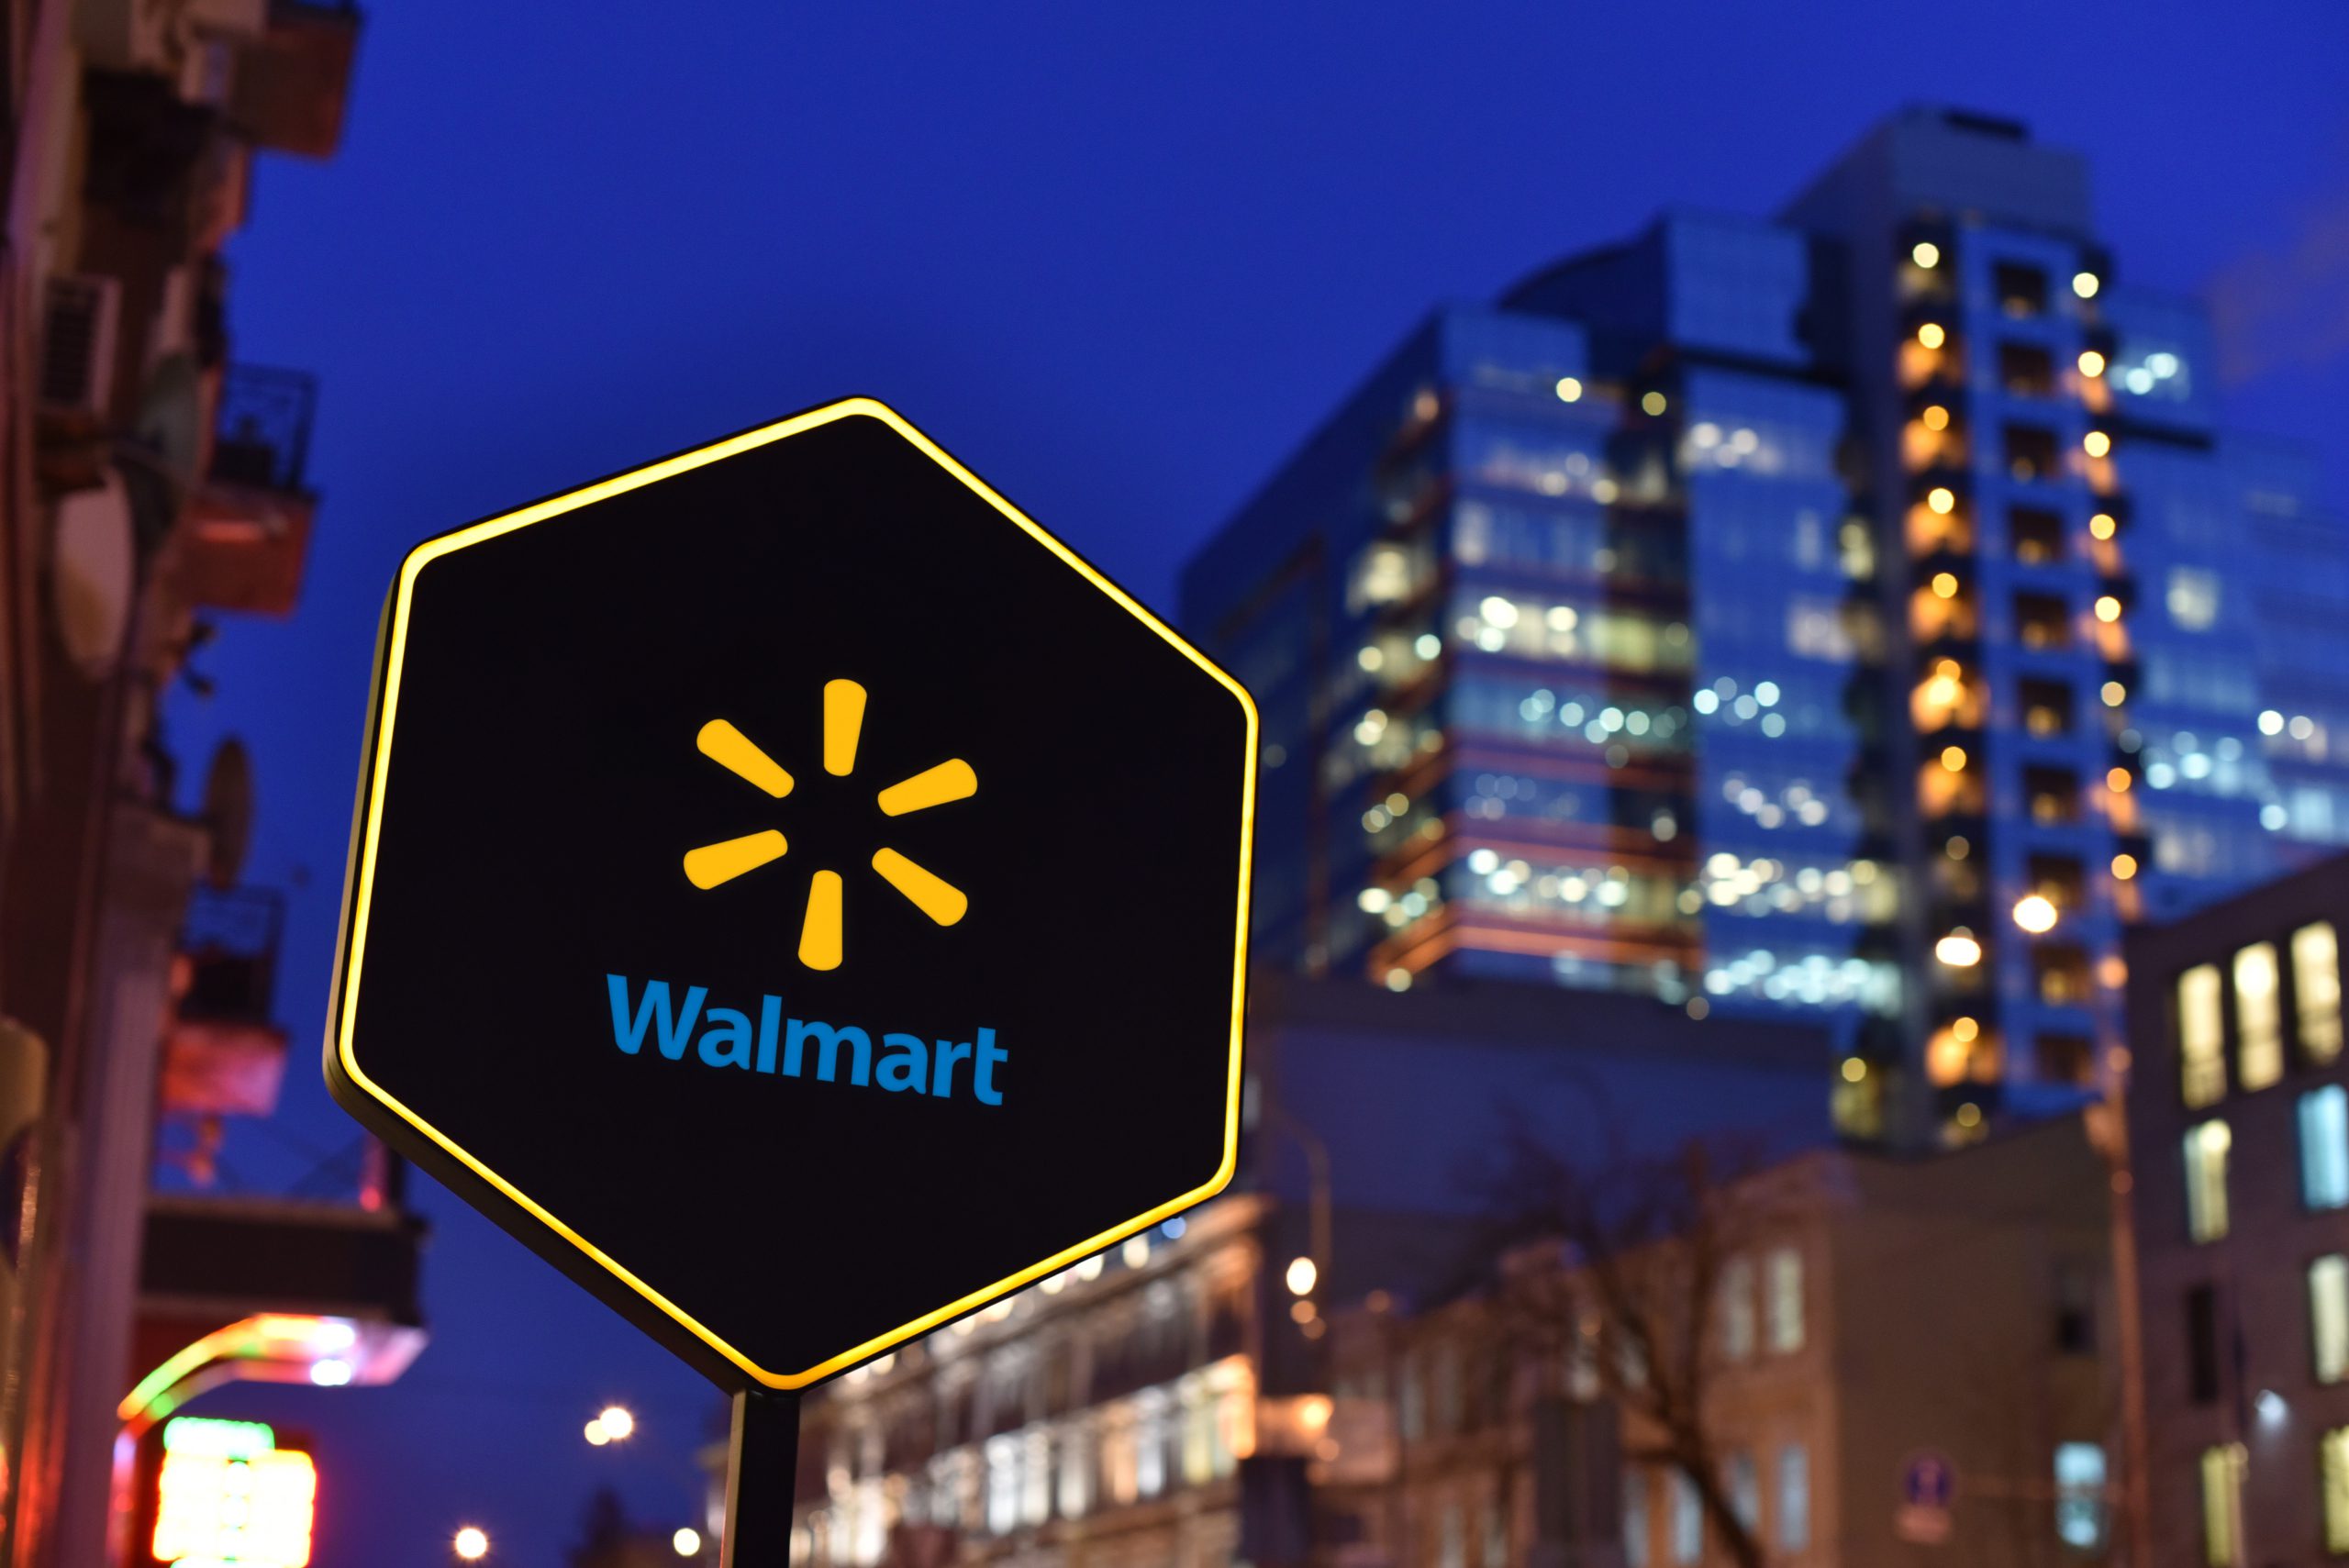 Walmart Joins Metaverse in Partnership with Roblox
